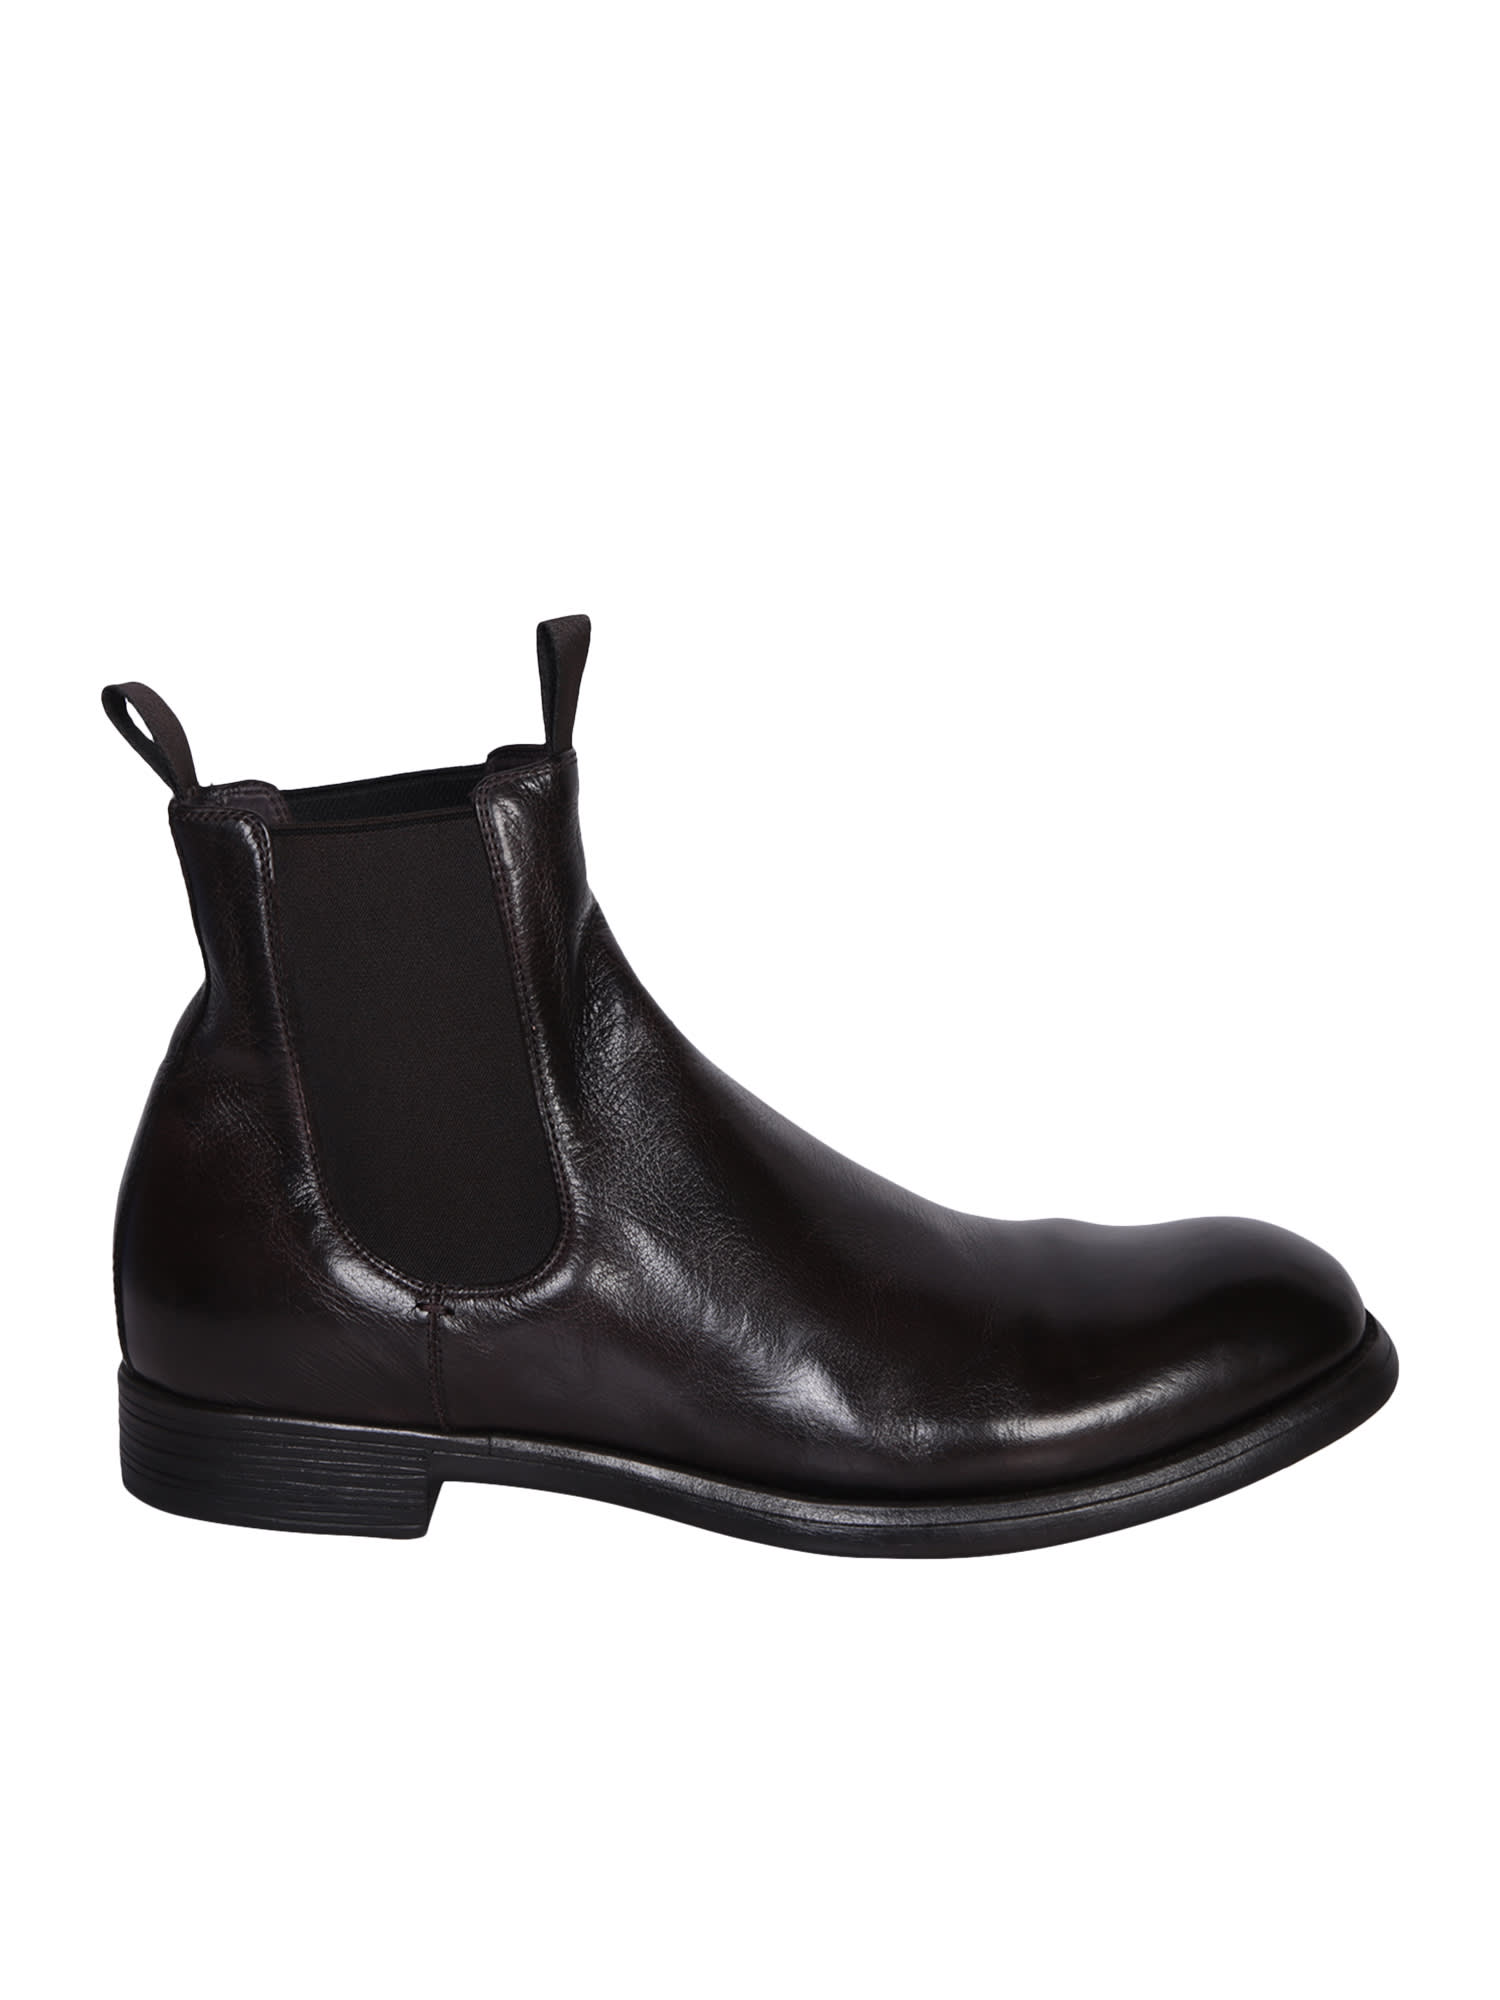 OFFICINE CREATIVE CHRONICLE 002 BLACK ANKLE BOOTS